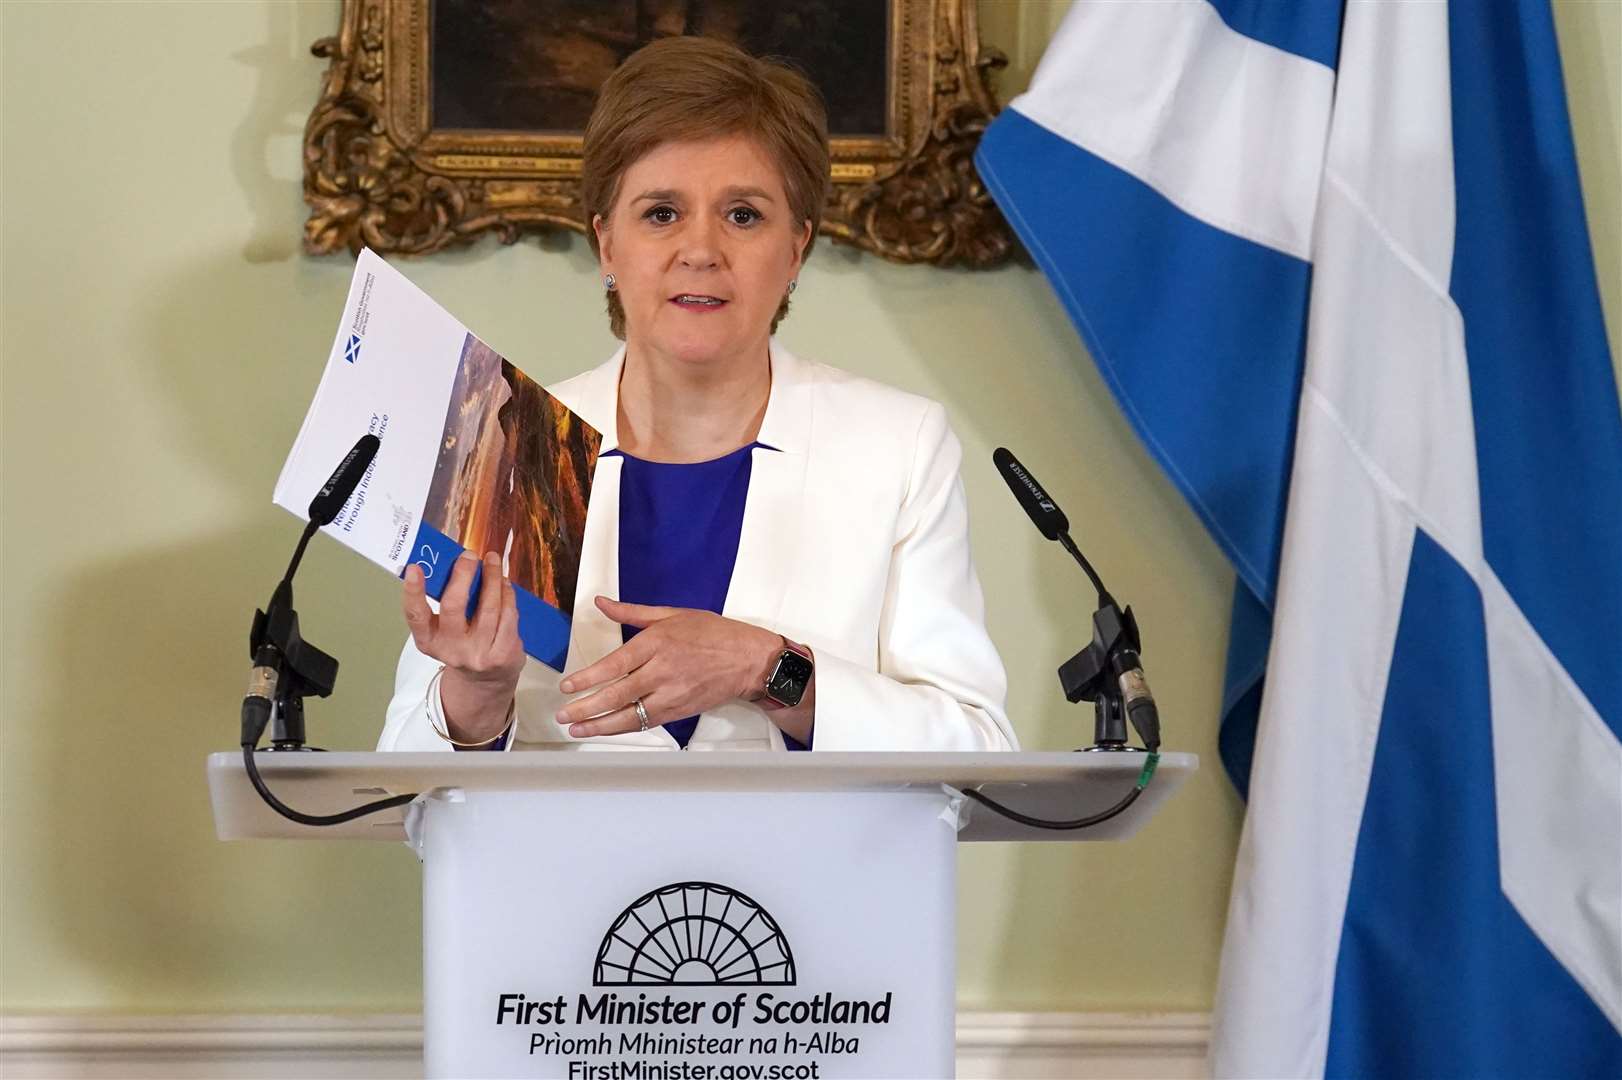 First Minister Nicola Sturgeon speaks at a press conference at Bute House in Edinburgh to launch a second independence paper (Andrew Milligan/PA)